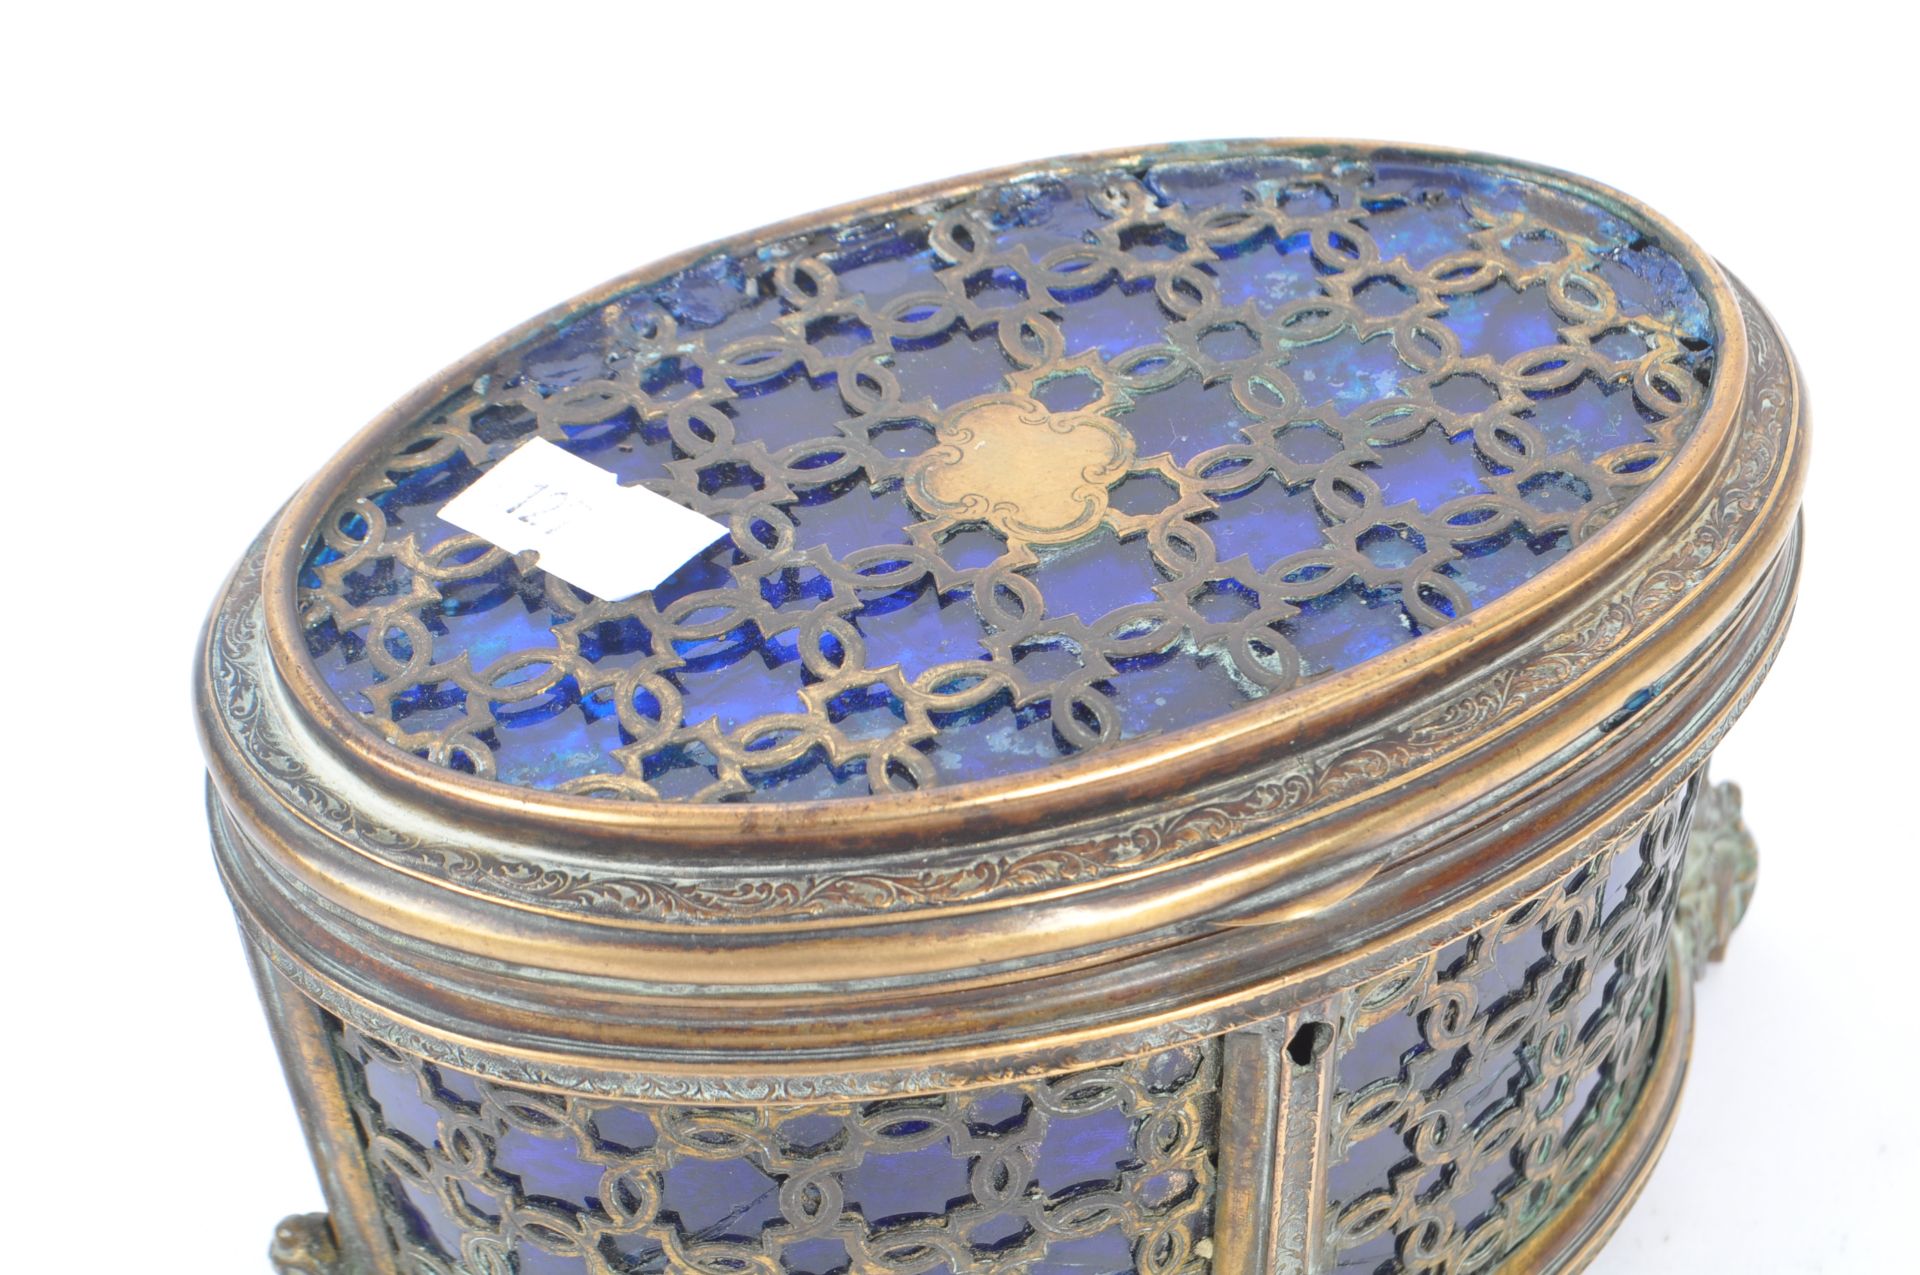 EARLY 20TH CENTURY BRASS AND BLUE GLASS TRINKET BOX - Image 6 of 6